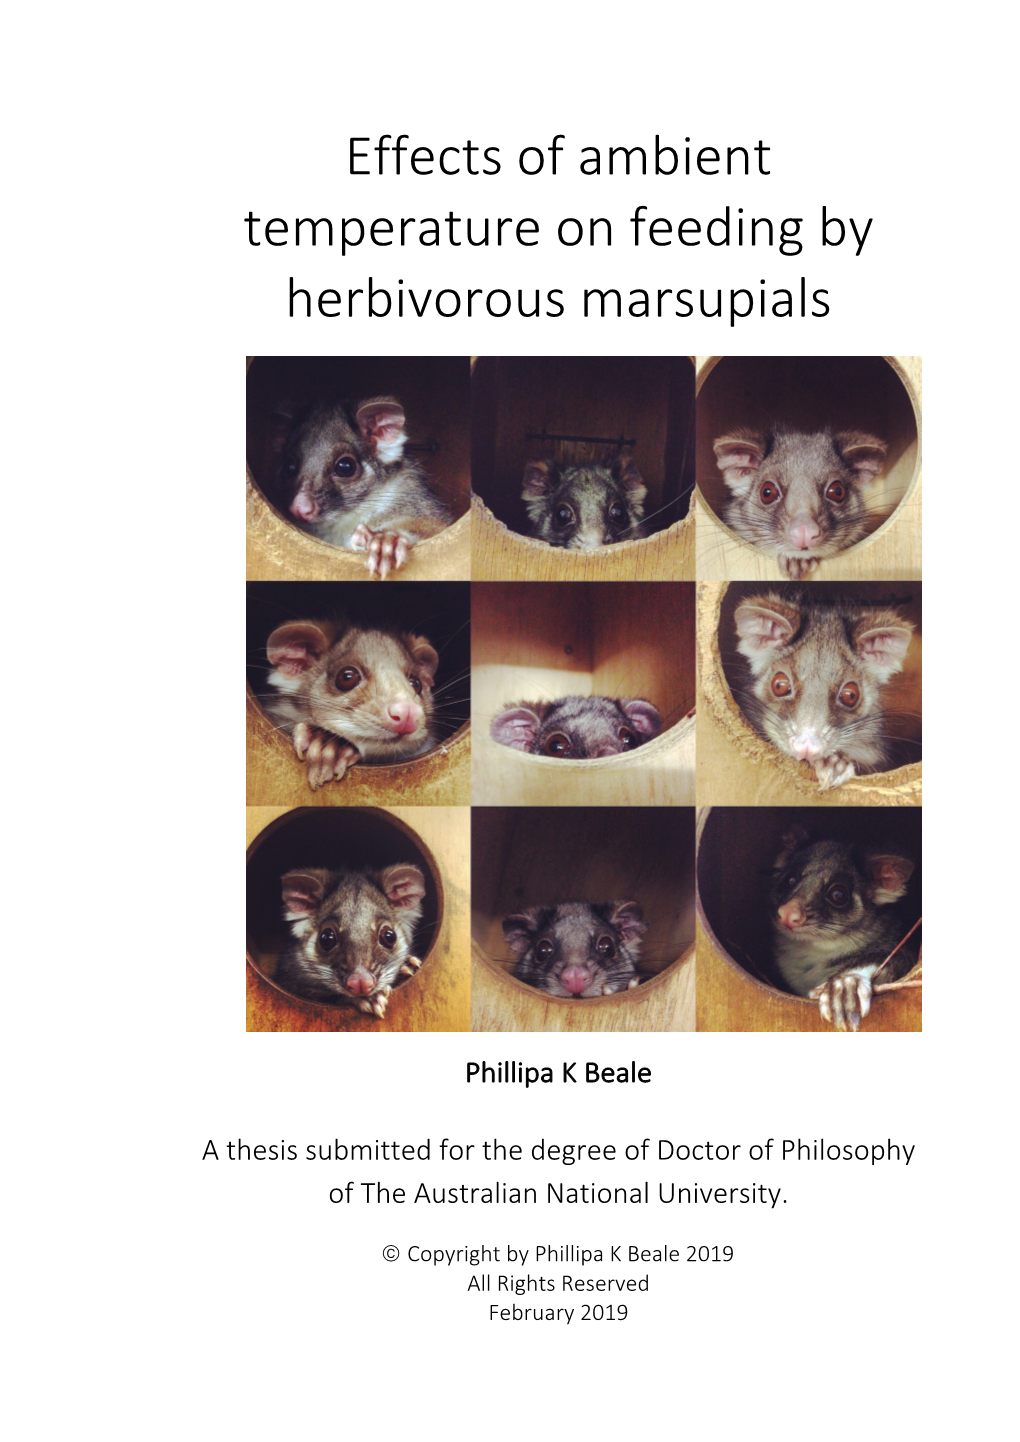 Effects of Ambient Temperature on Feeding by Herbivorous Marsupials